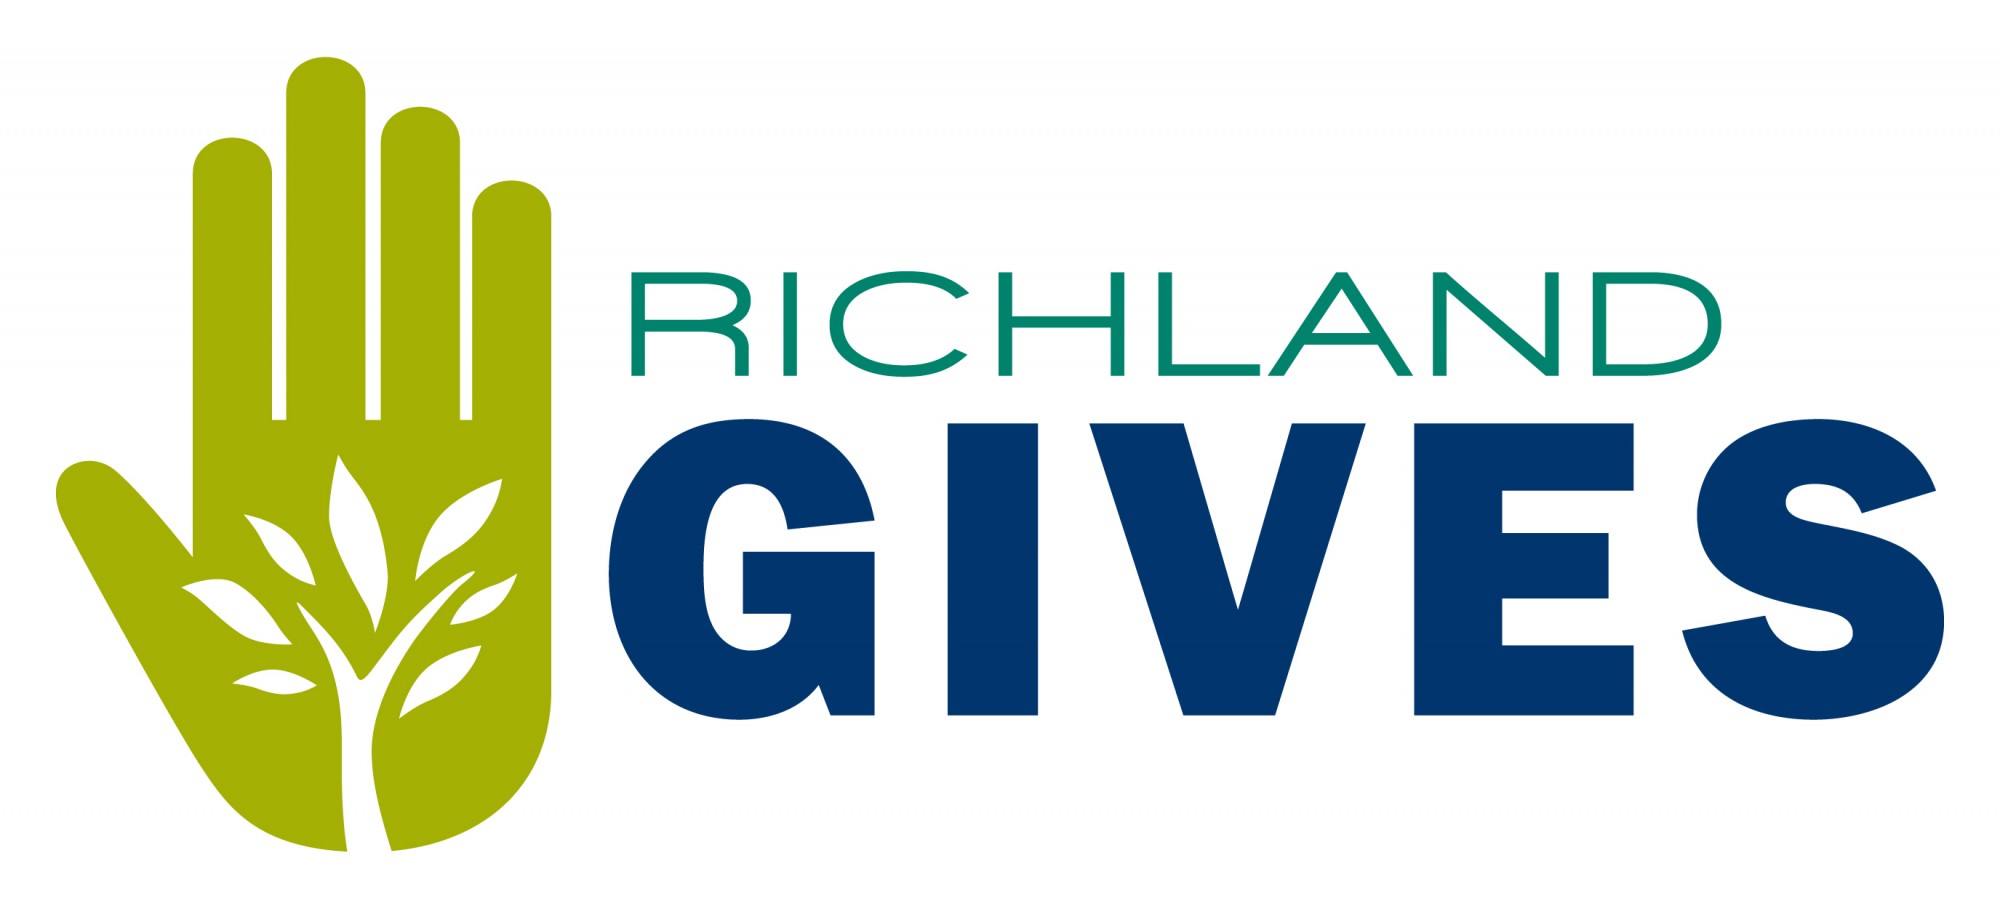 Nonprofits can sign up for Richland Gives